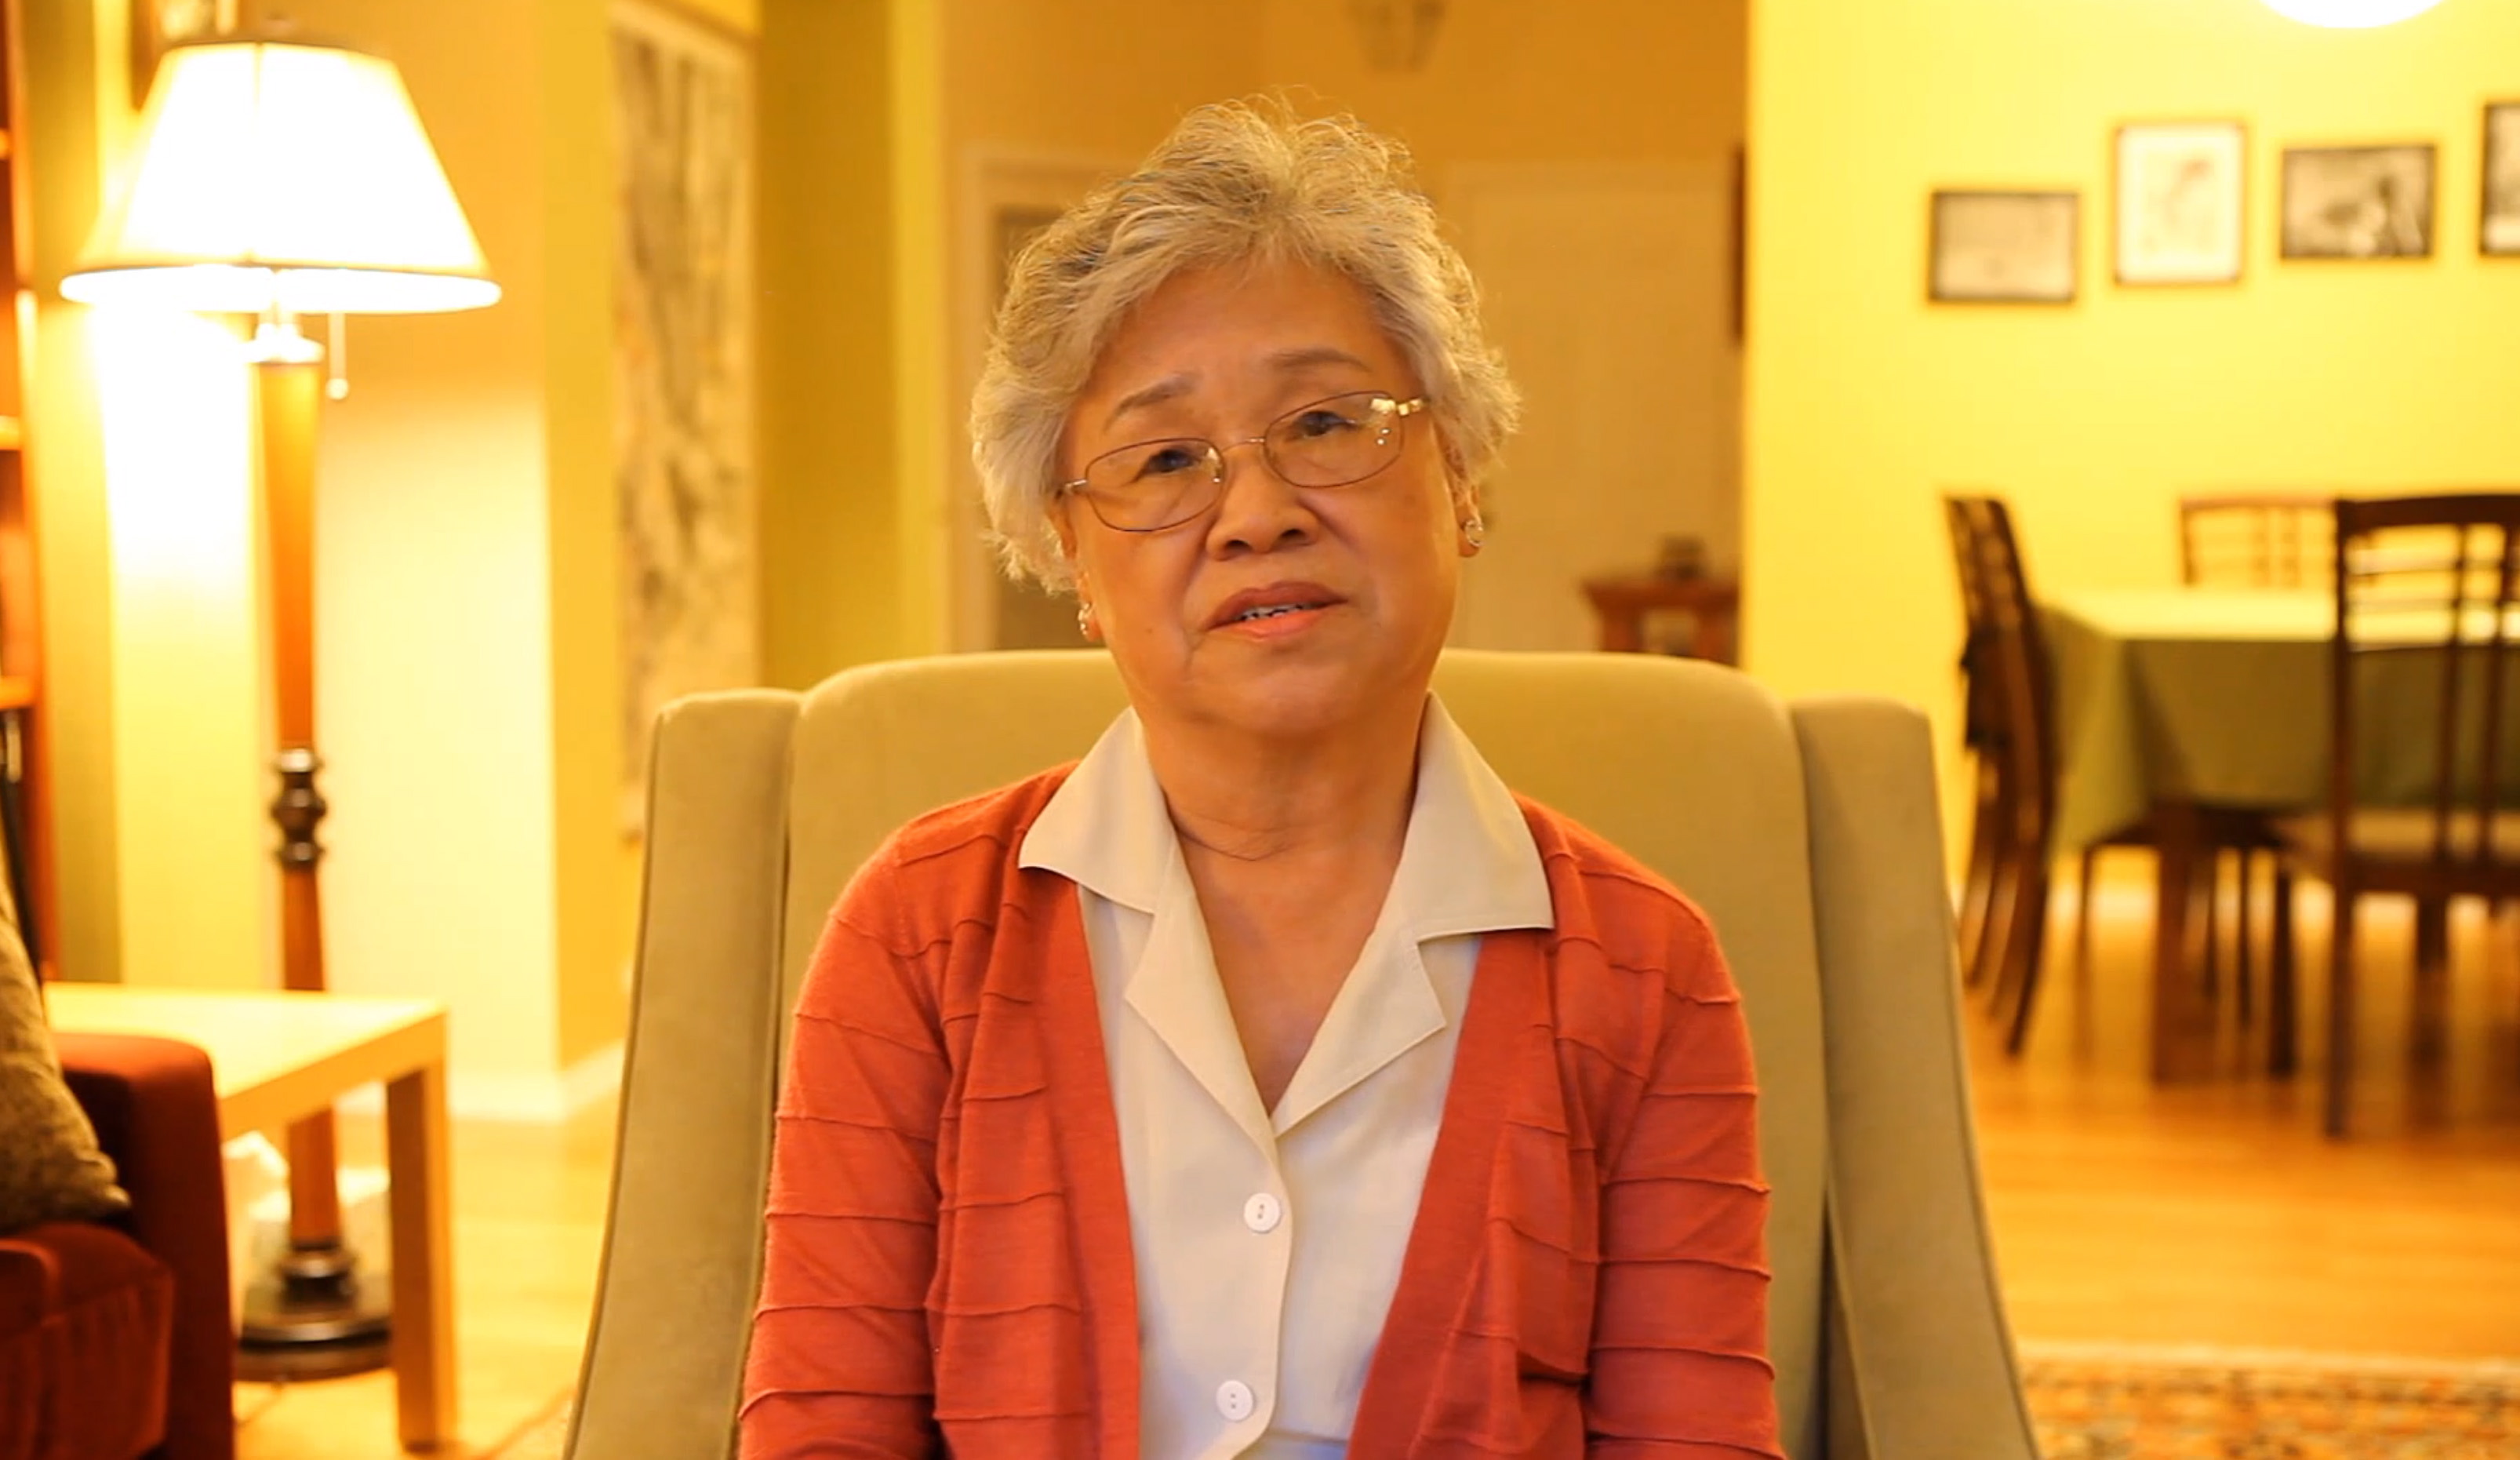 In this still frame from an undated video released Thursday by the family of Kenneth Bae, Bae's mother, Myunghee Bae, talks about her upcoming trip to North Korea to visit her son, Kenneth Bae, a 45-year-old tour operator and Christian missionary who was arrested last November while leading a group of tourists in the northeastern region of Rason in North Korea. Myunghee Bae is in Pyongyang and was allowed to meet with her son Friday.